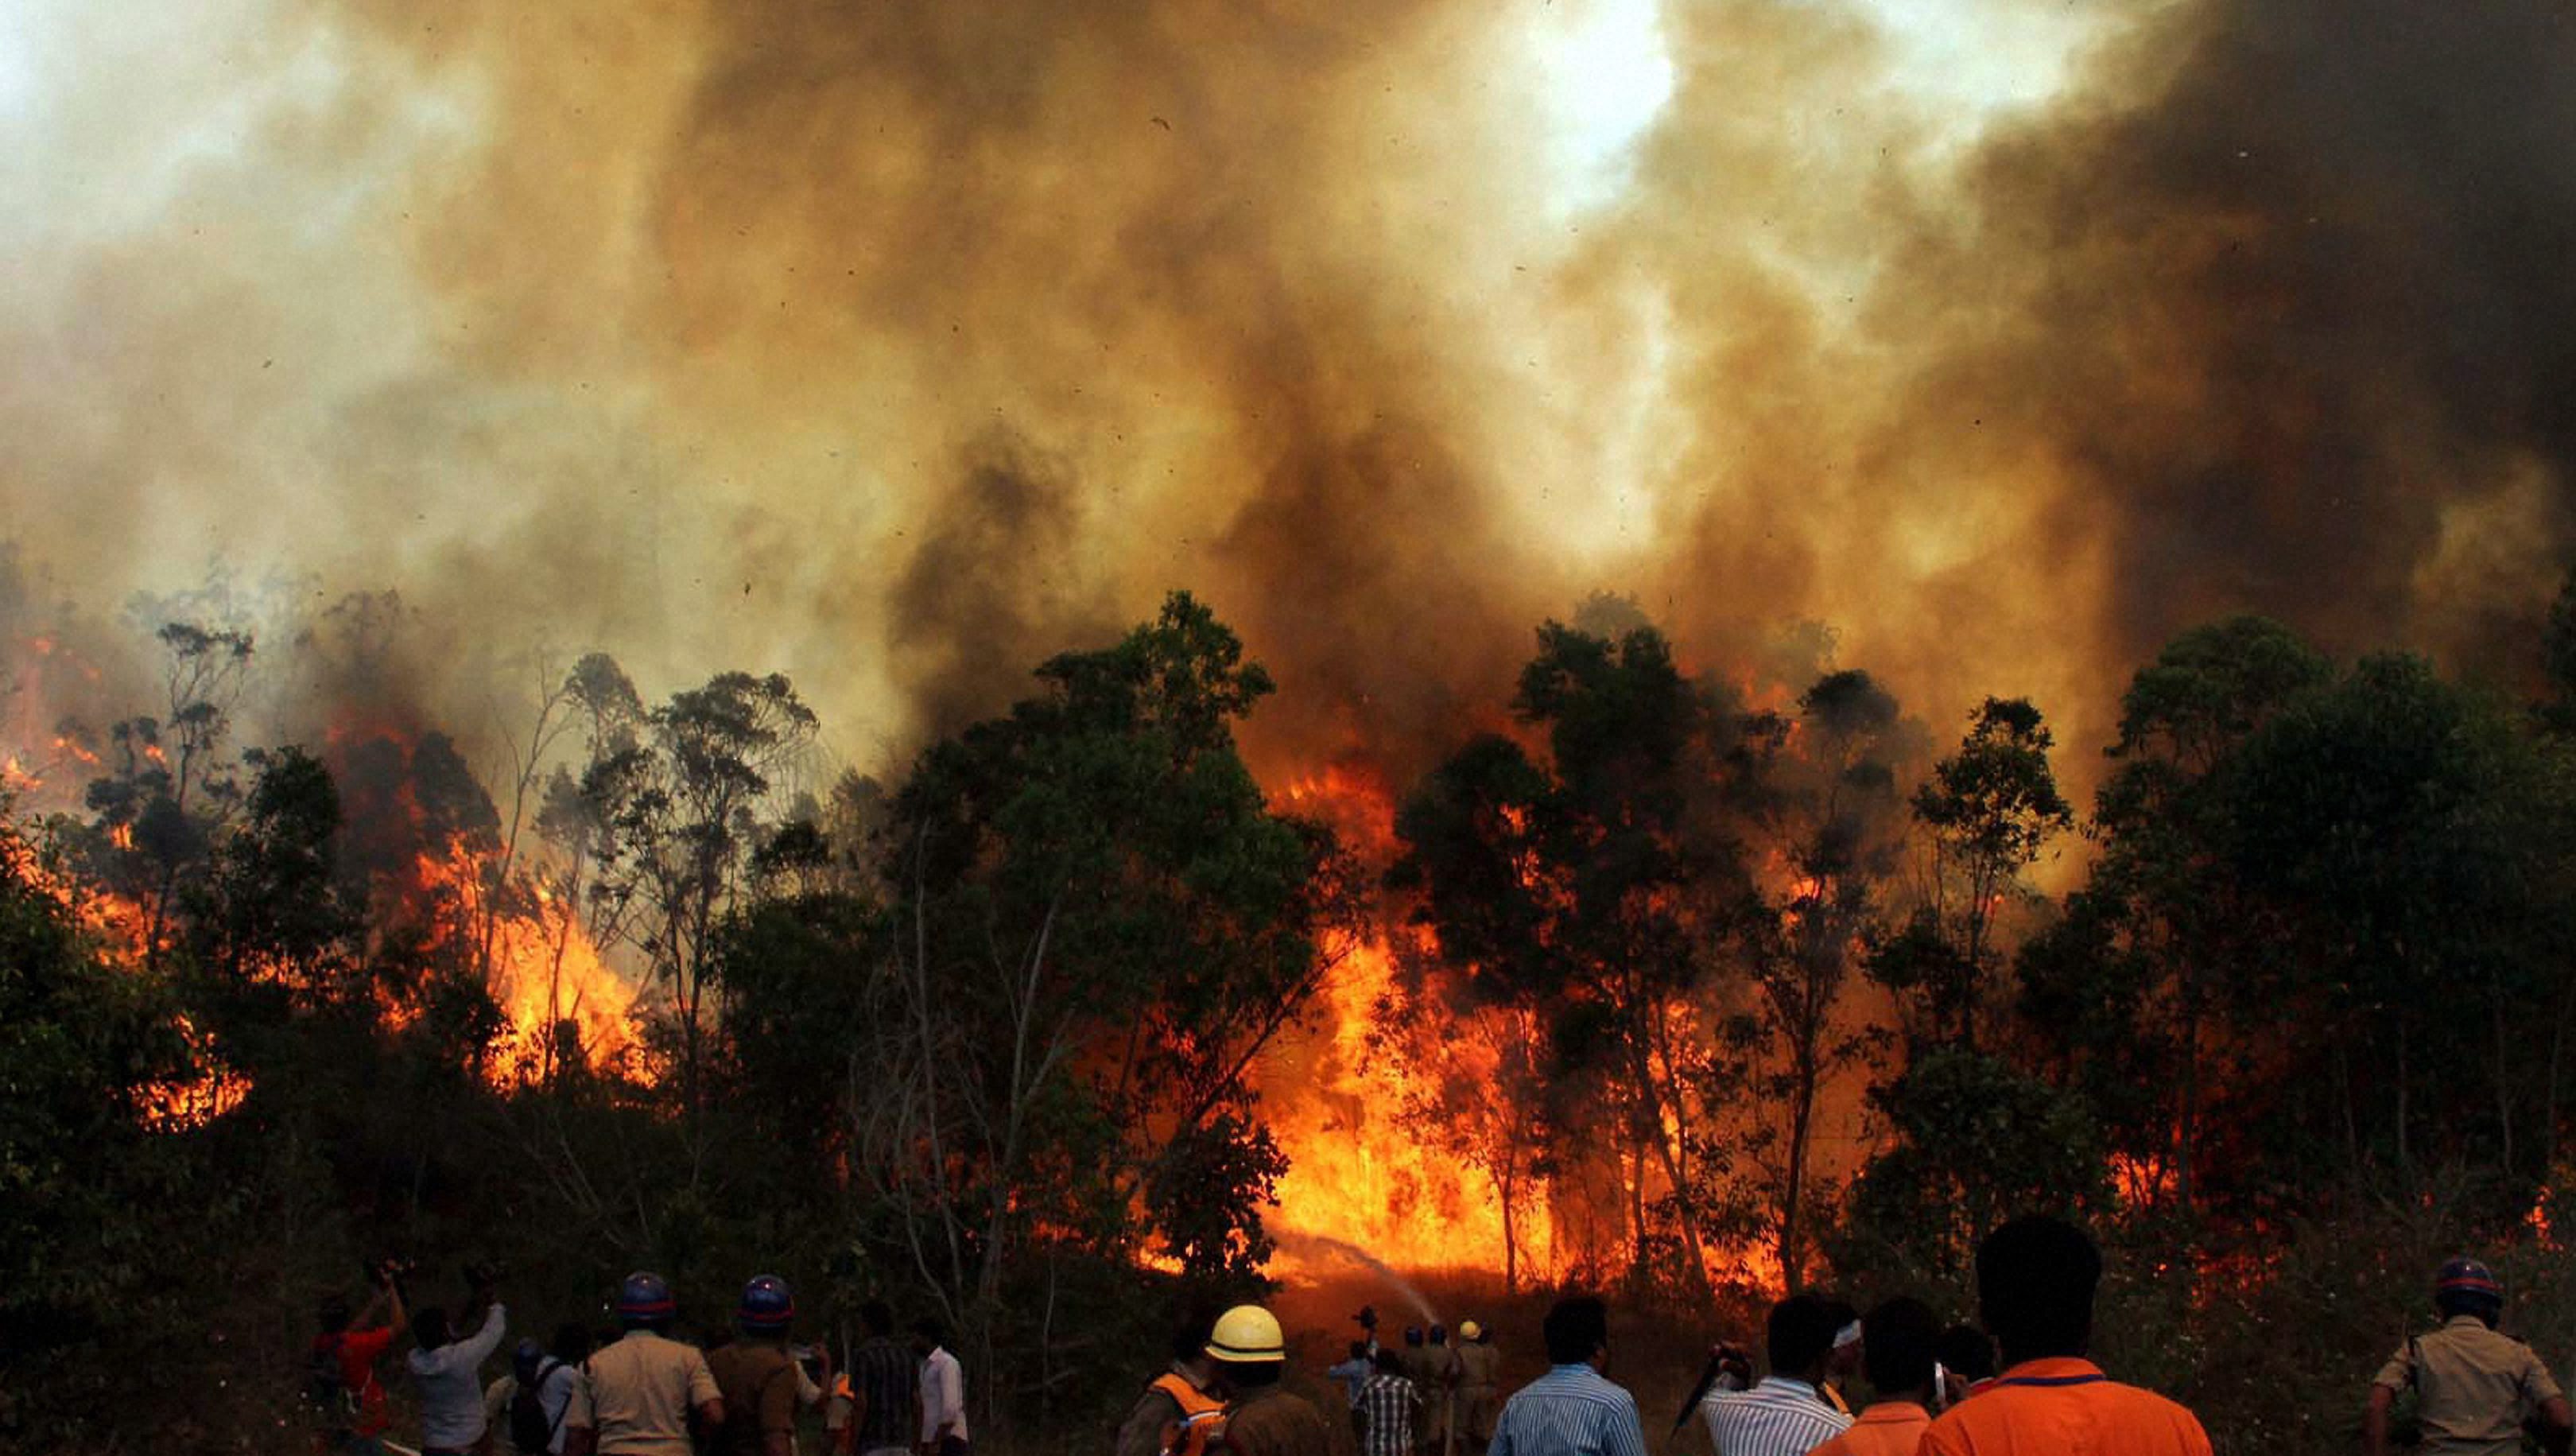 Tirumala fire: Indian Air Force helps control inferno in the ...